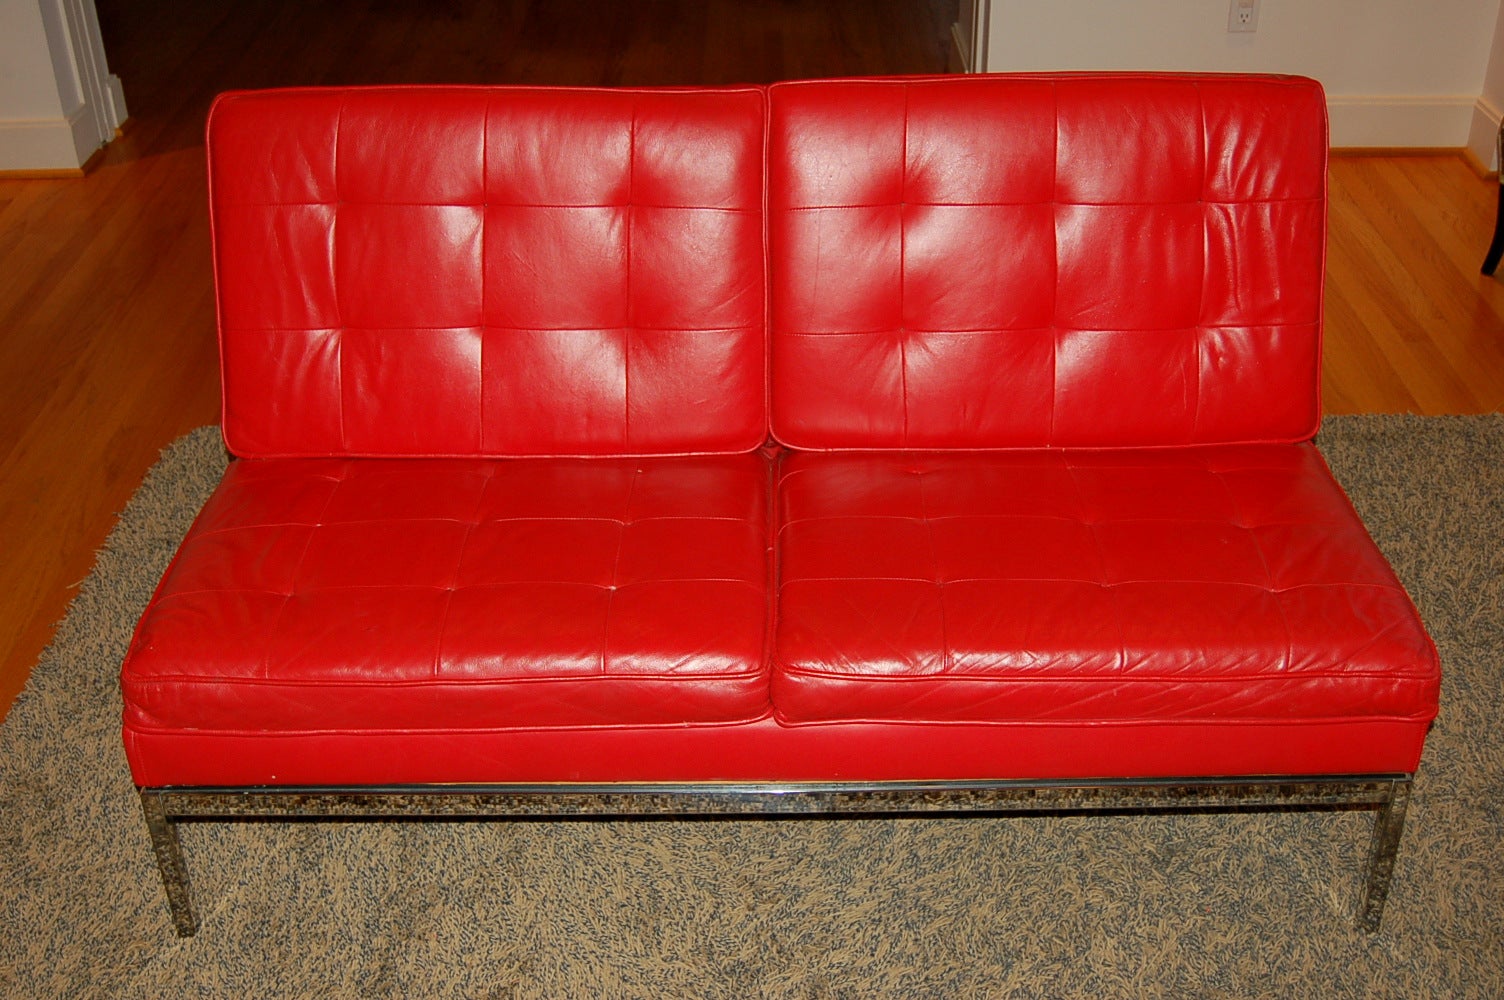 Knoll Armless 2 Seat Sofa in Lipstick Red Leather